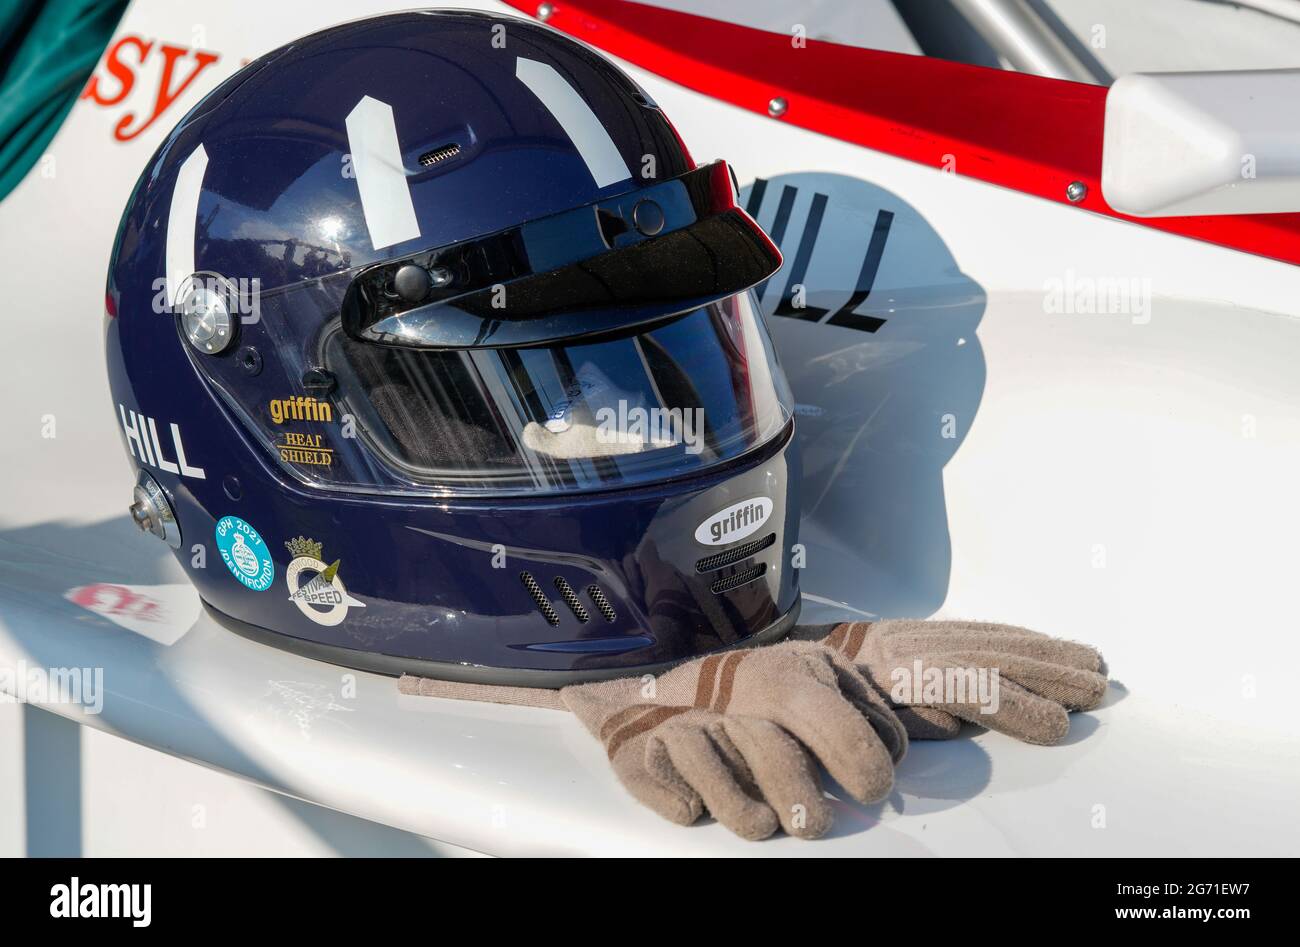 A navy blue crash helmet with white oar-shaped flashes and brown leather driving gloves worn by Graham Hill, F1 racing driver. Festival of Speed 2021 Stock Photo